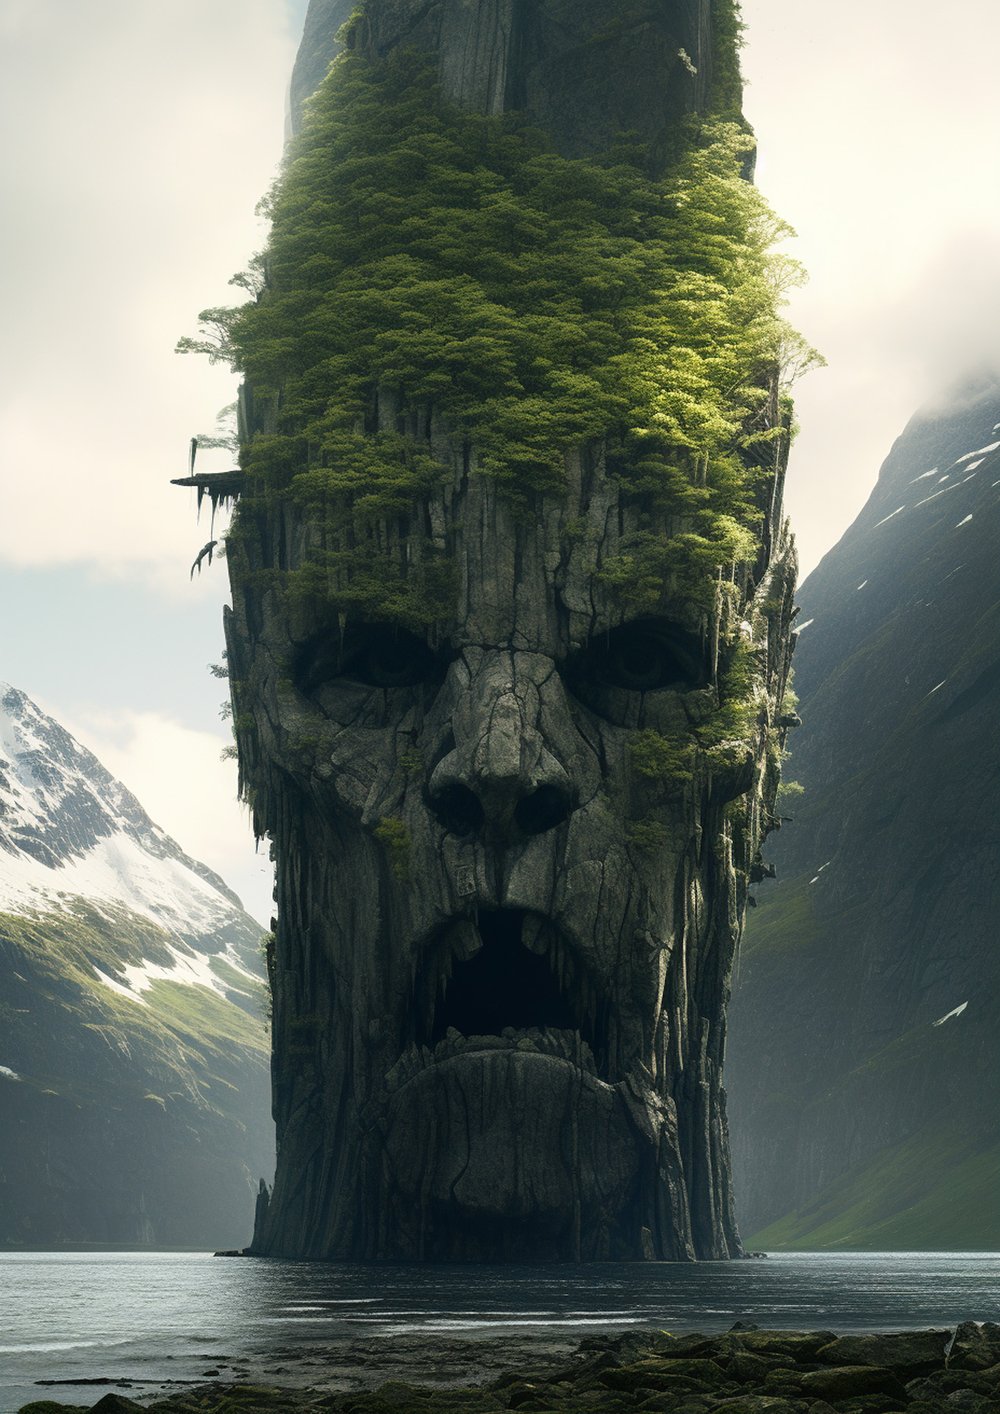  Artistic representations of heads, crafted from the imagery of Norwegian mountains, forests, and fjords 